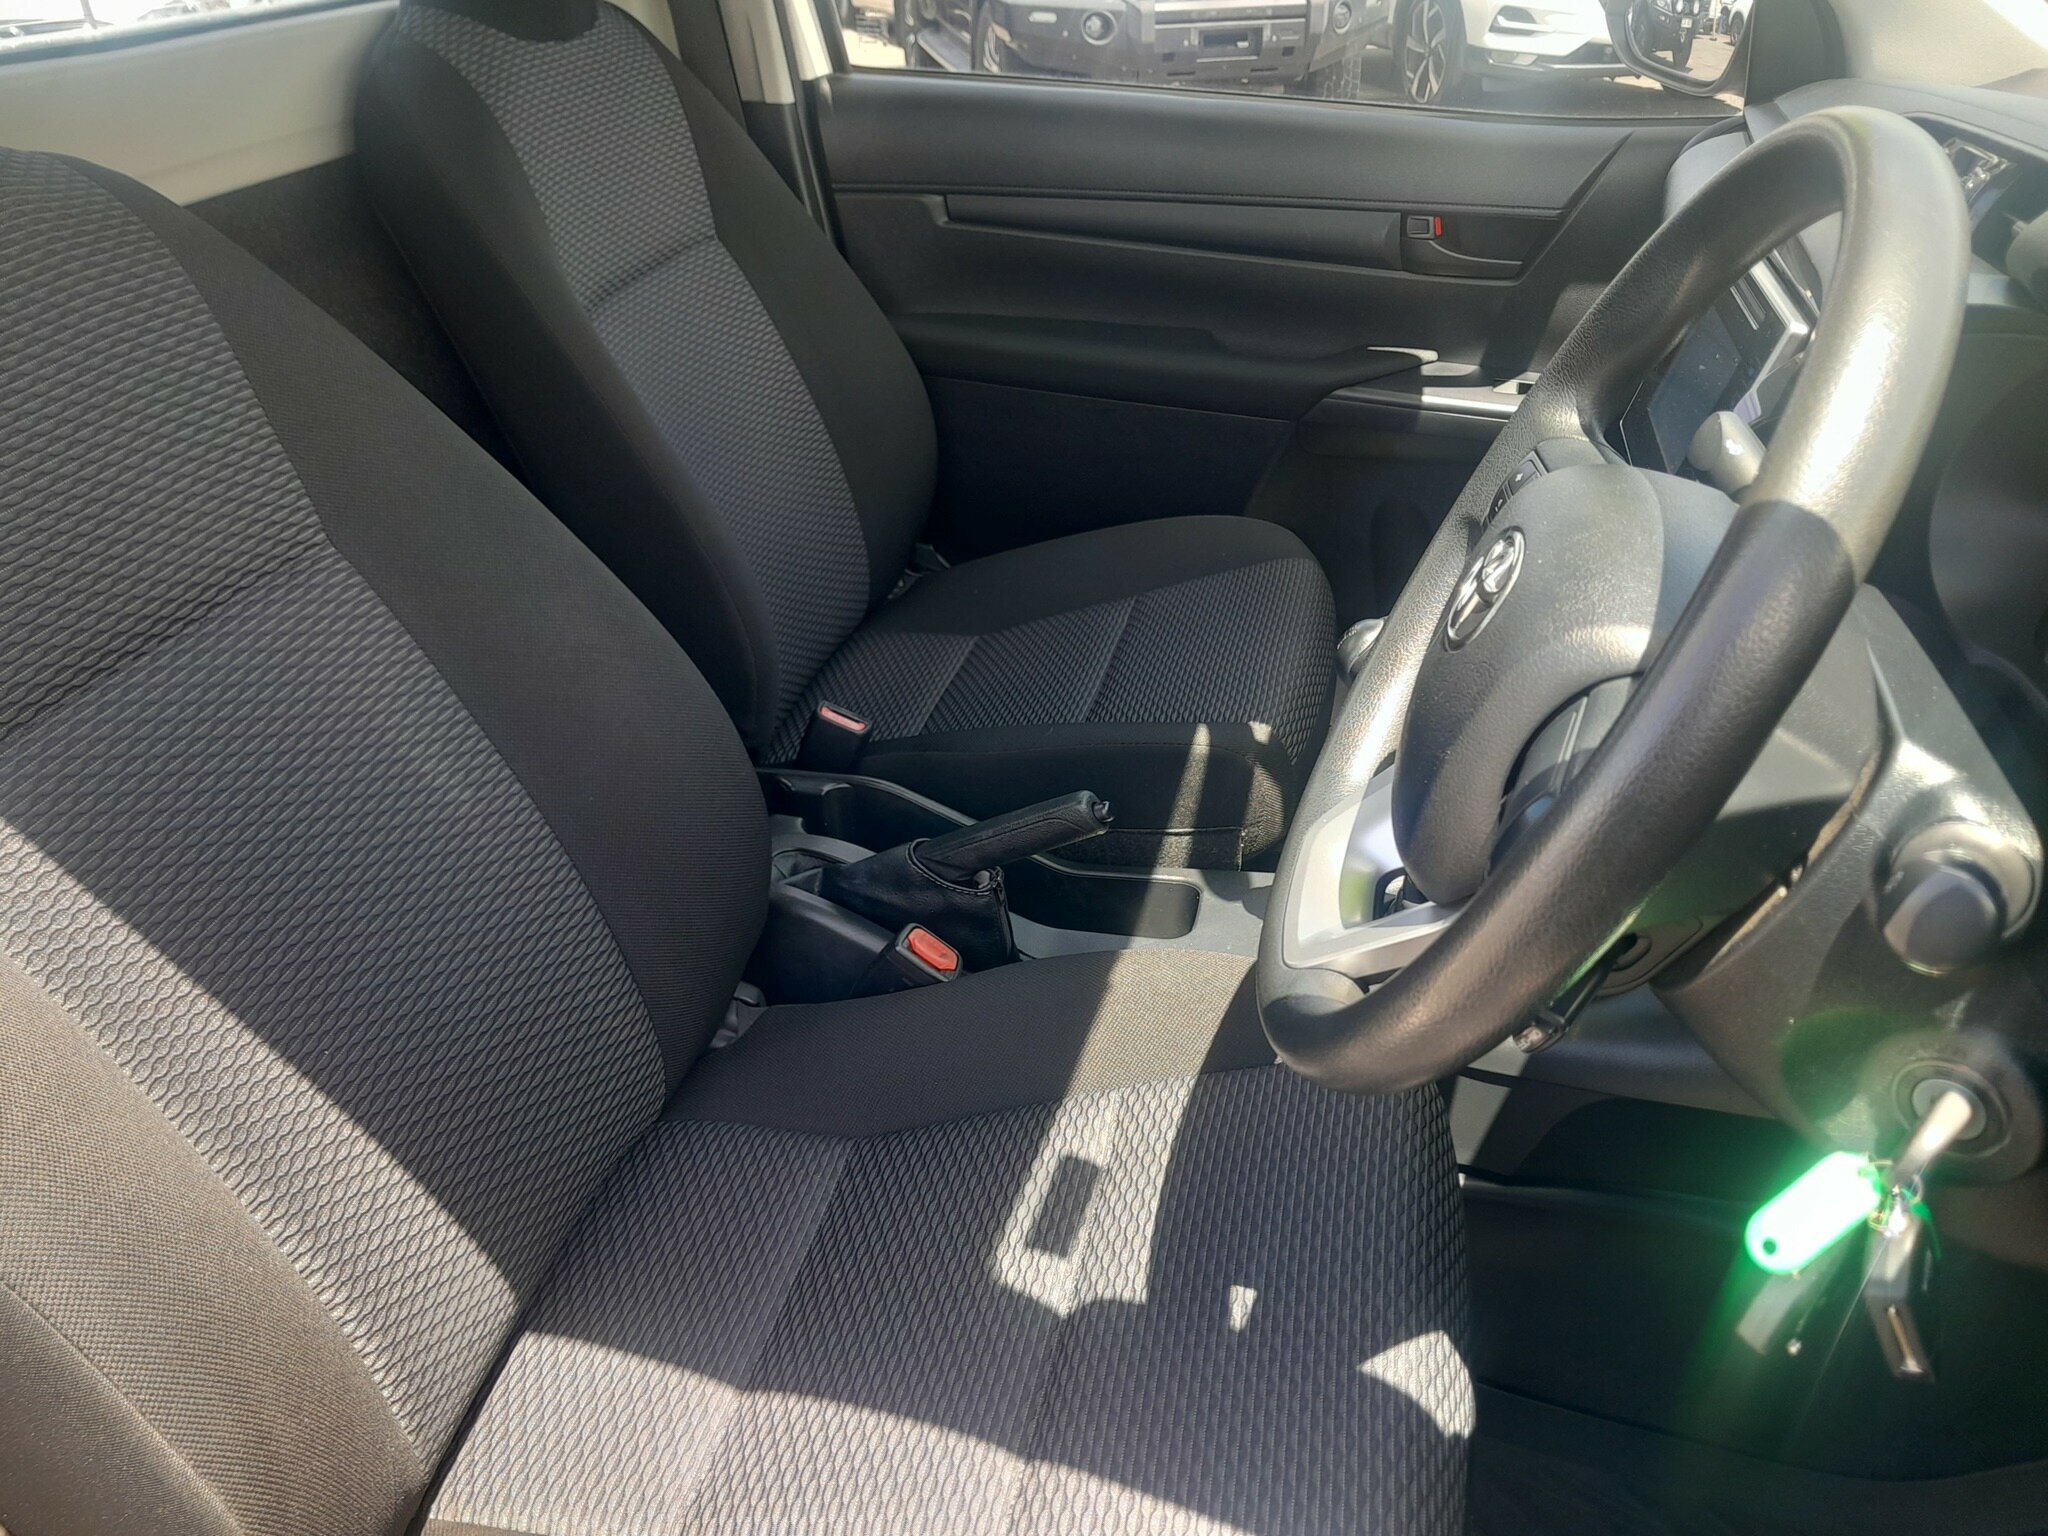 2018 Toyota Hilux GUN122R Workmate 4x2 Cab Chassis Image 10